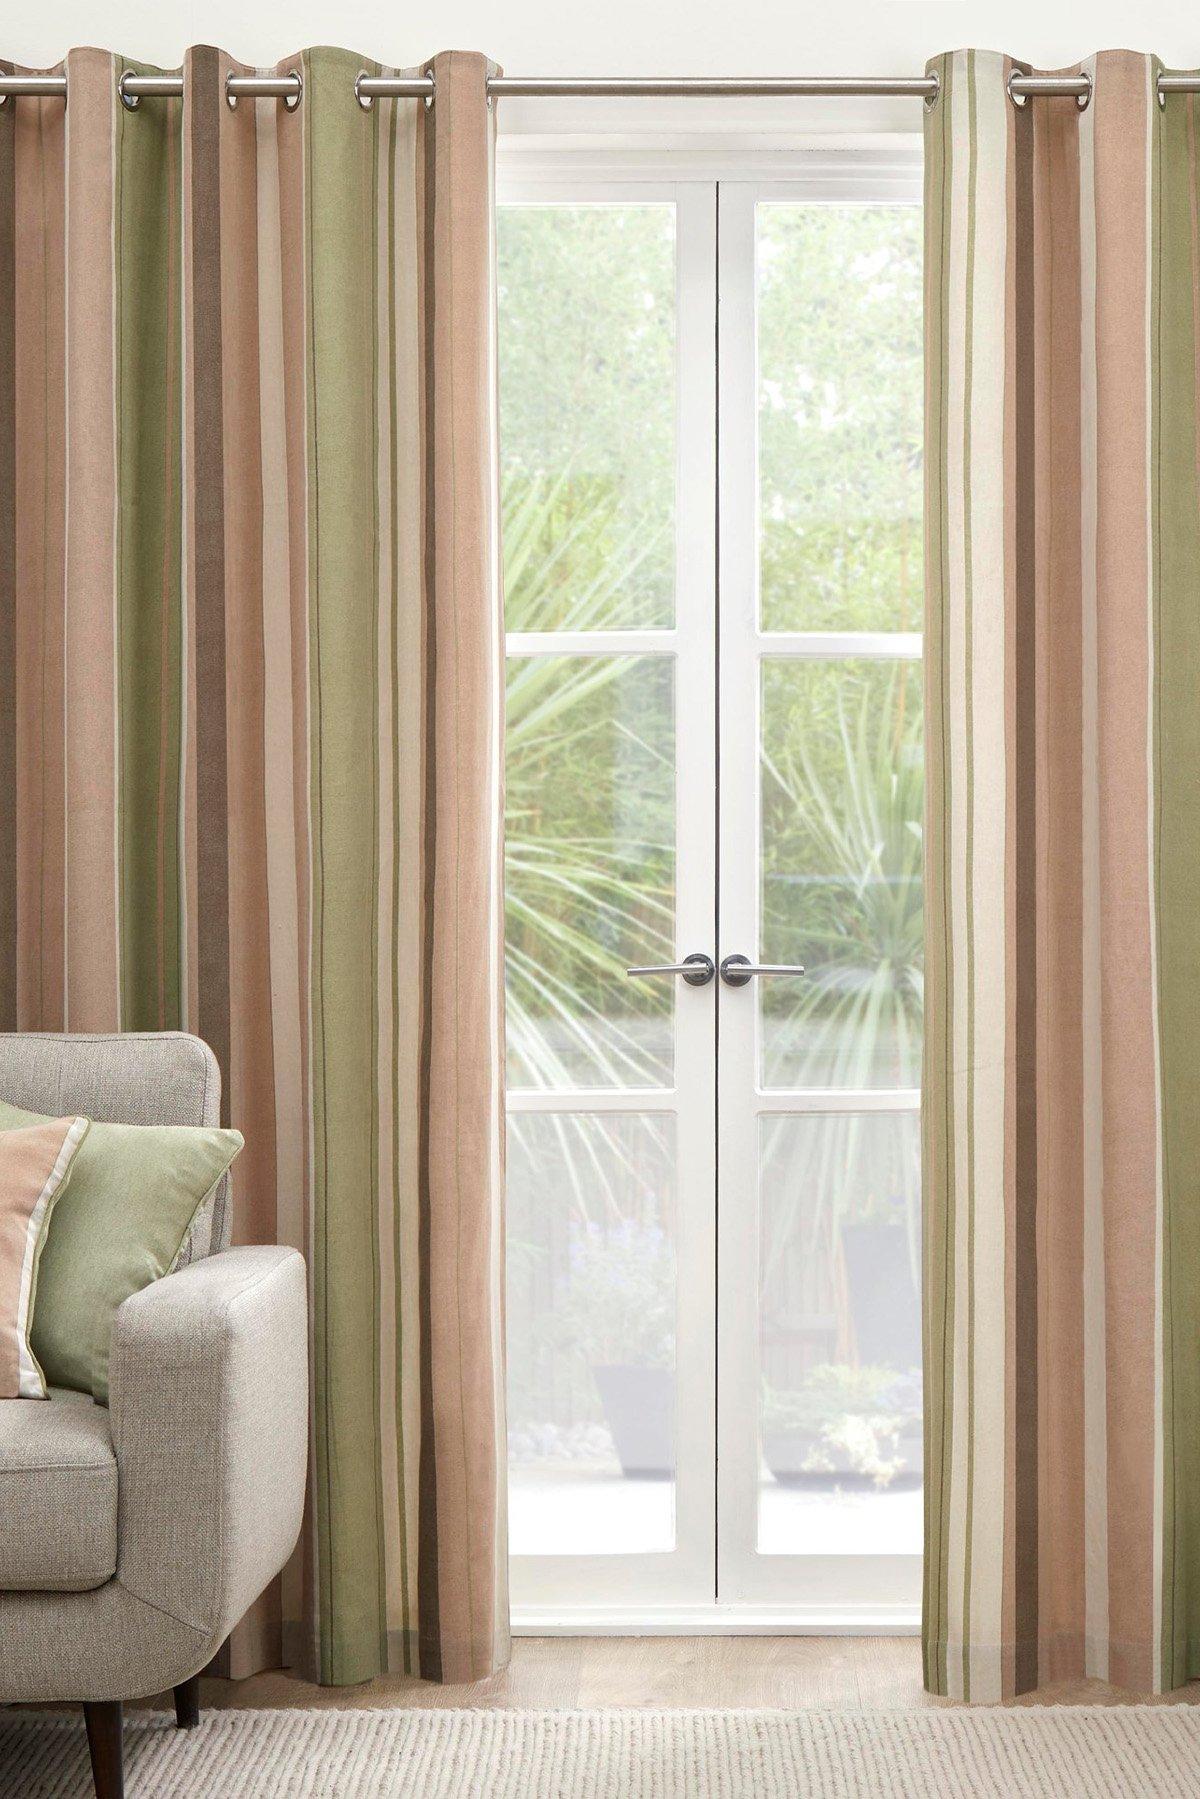 'Whitworth Stripe' Fully Lined 100% Cotton Eyelet Curtains